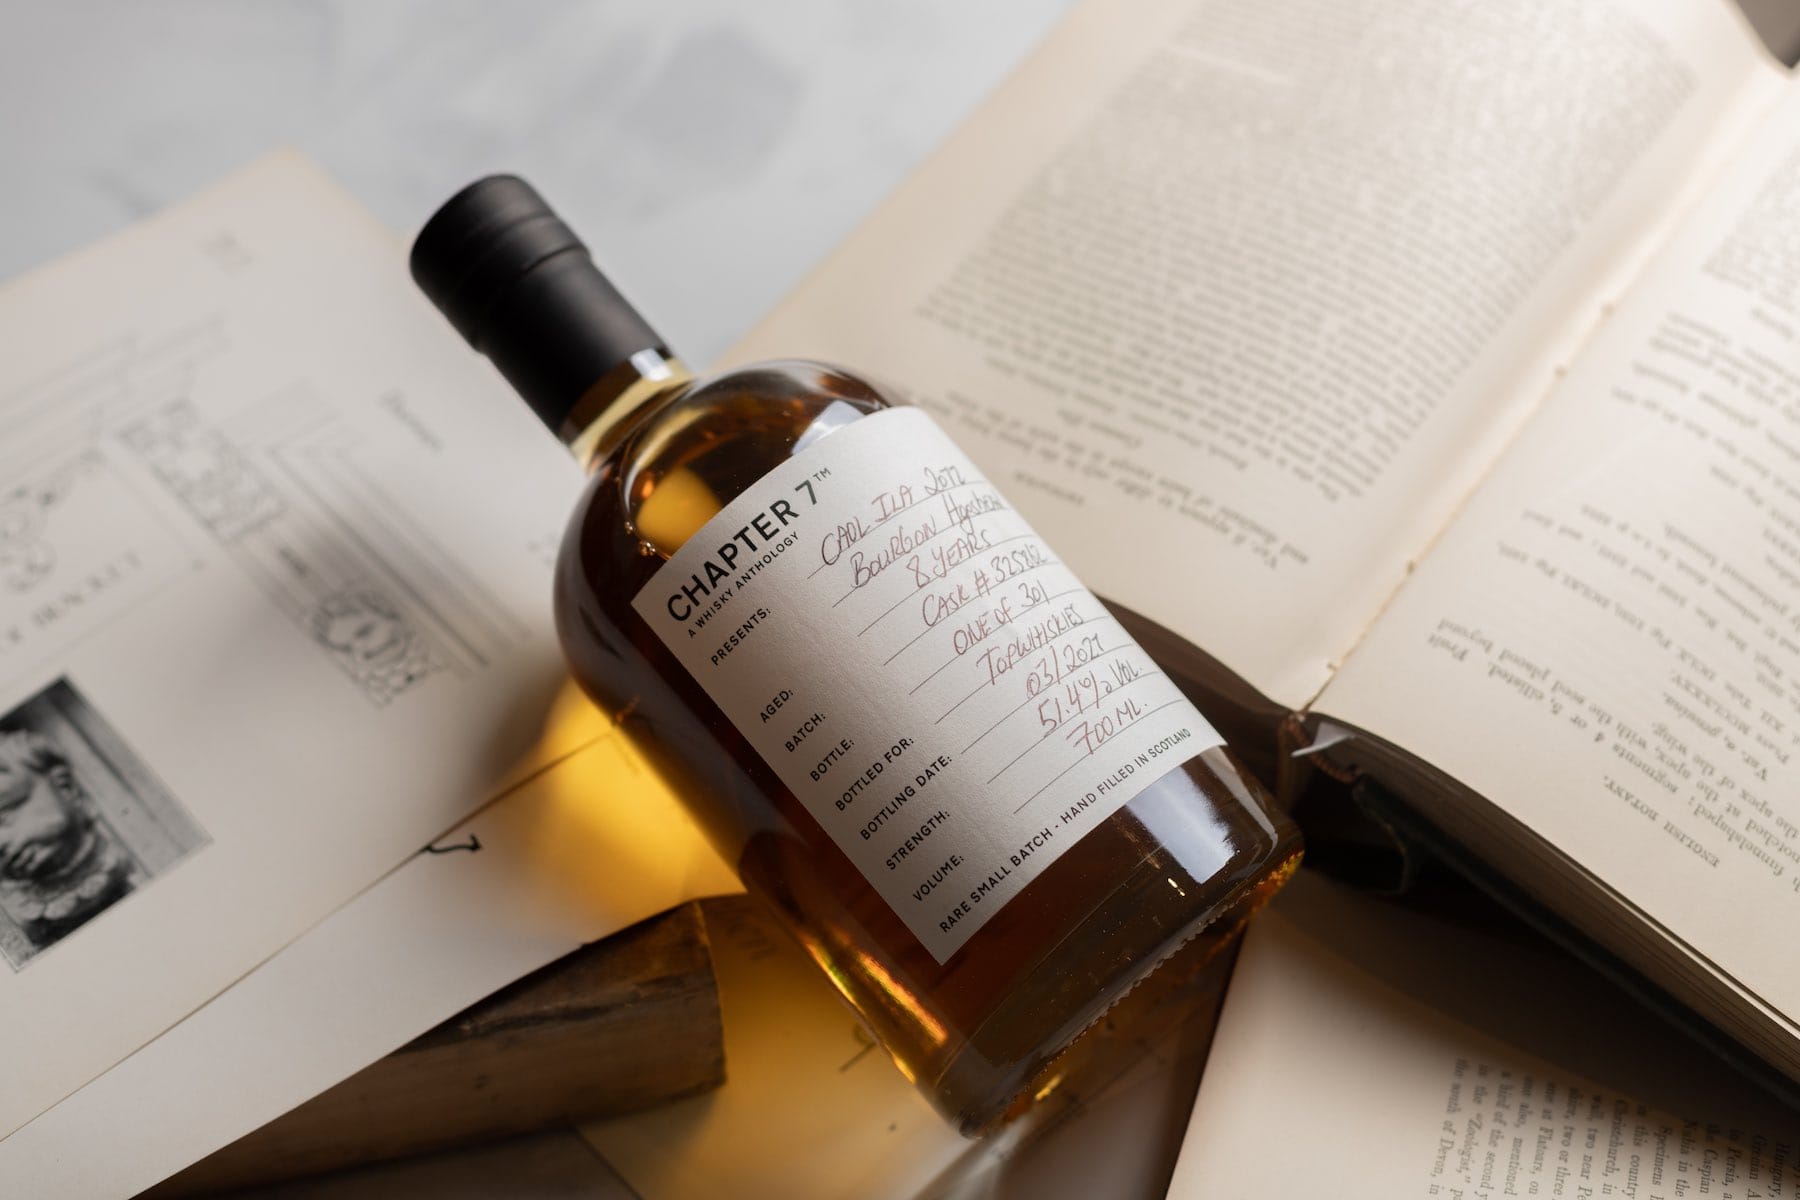 TopWhiskies and Chapter 7 Whisky Collaboration